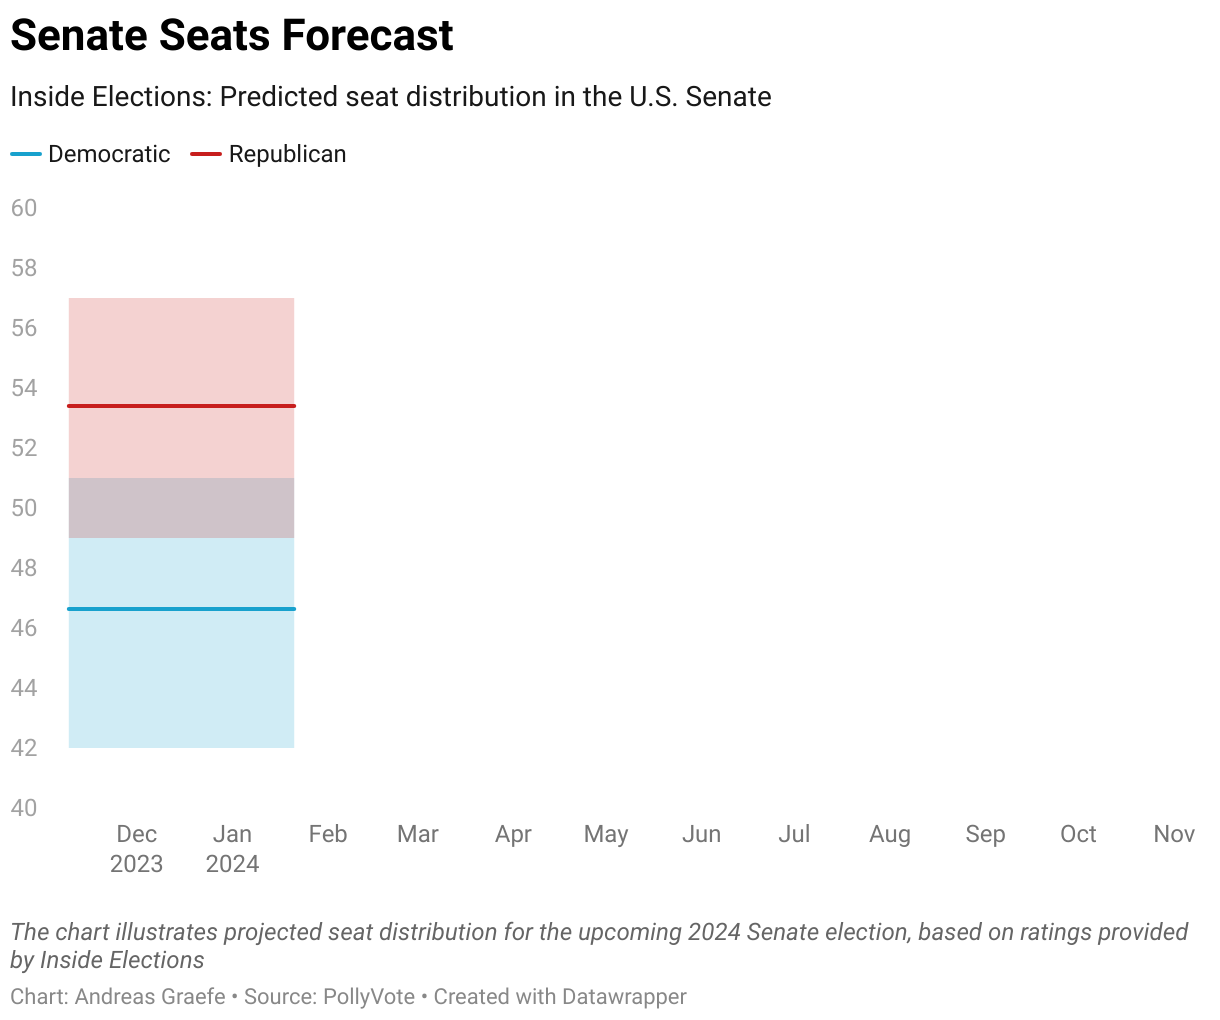 The chart illustrates projected seat distribution for the upcoming 2024 Senate election, based on ratings provided by Inside Elections